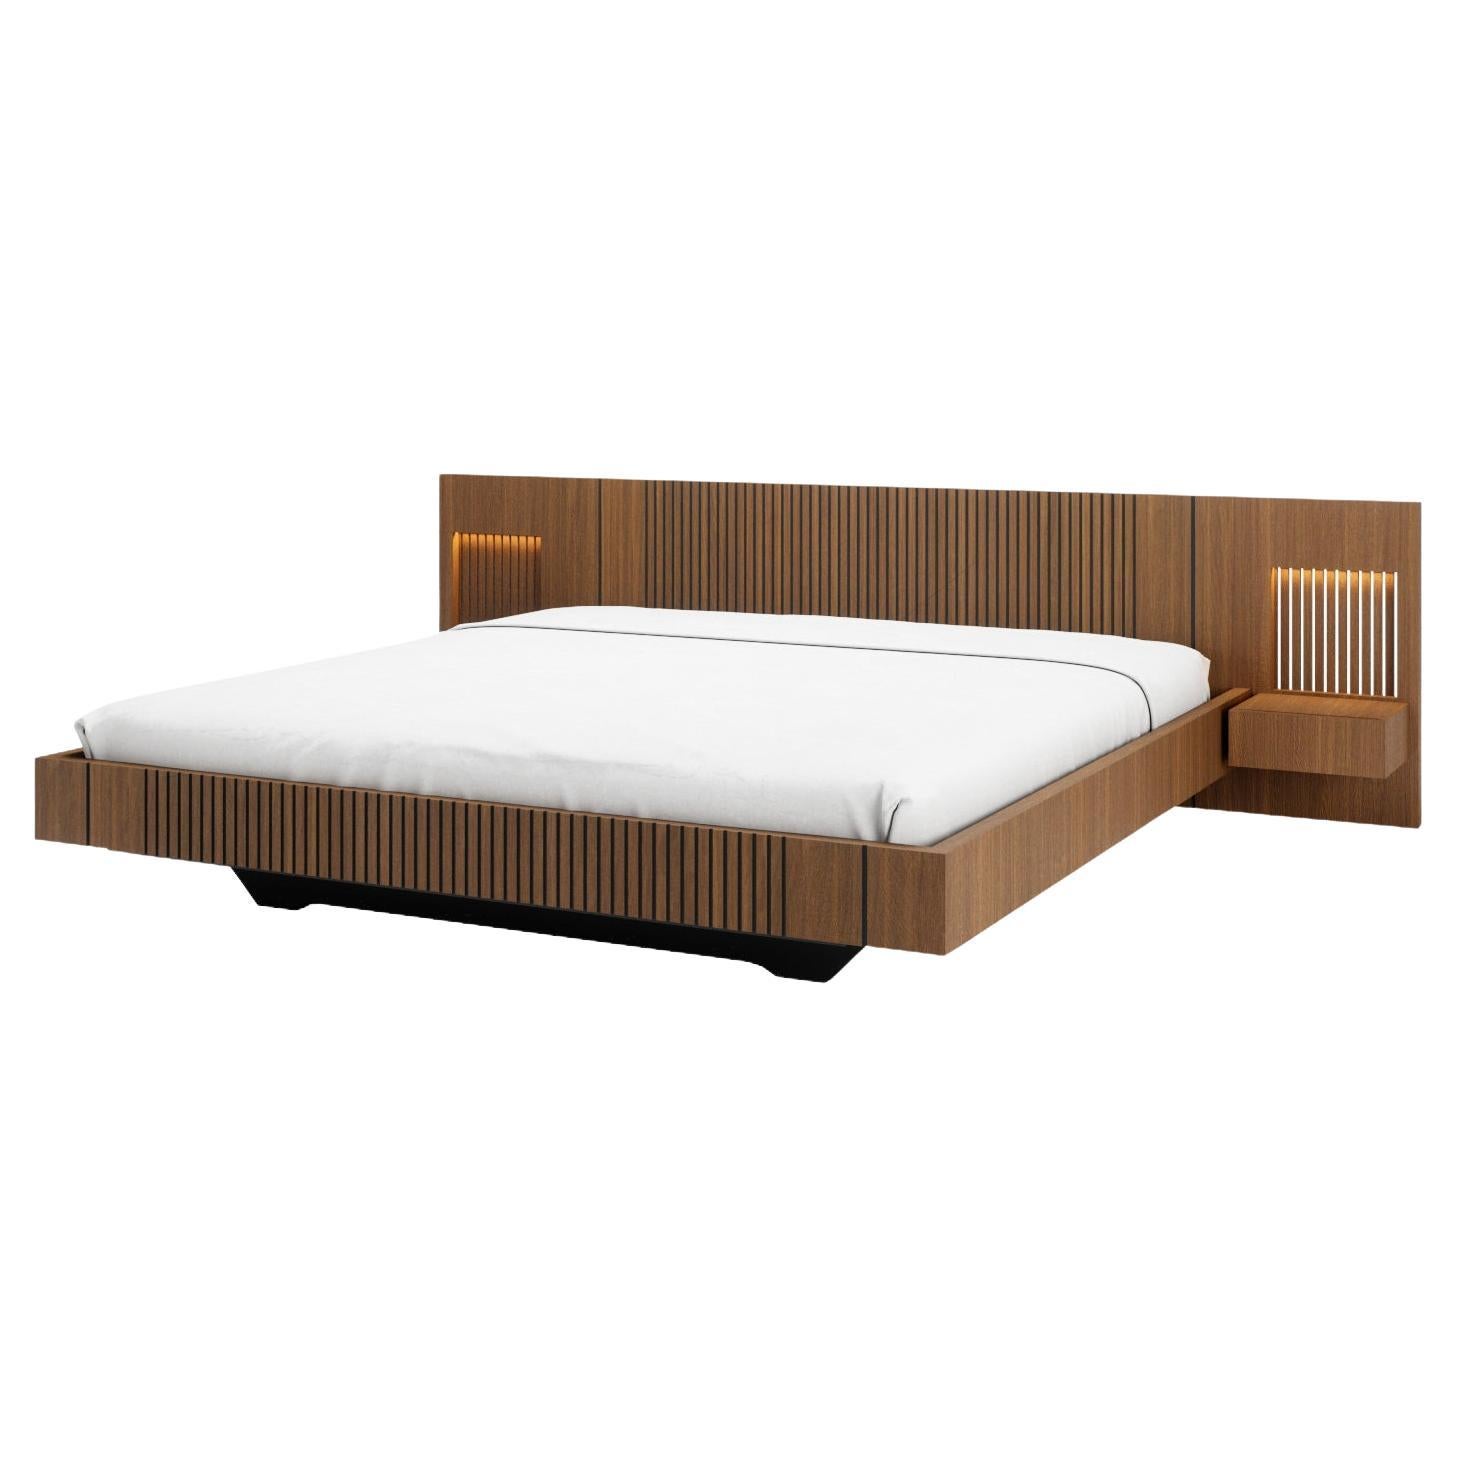 Piana 213cm Size Bed with 2 Drawers and Leds on Bed Head